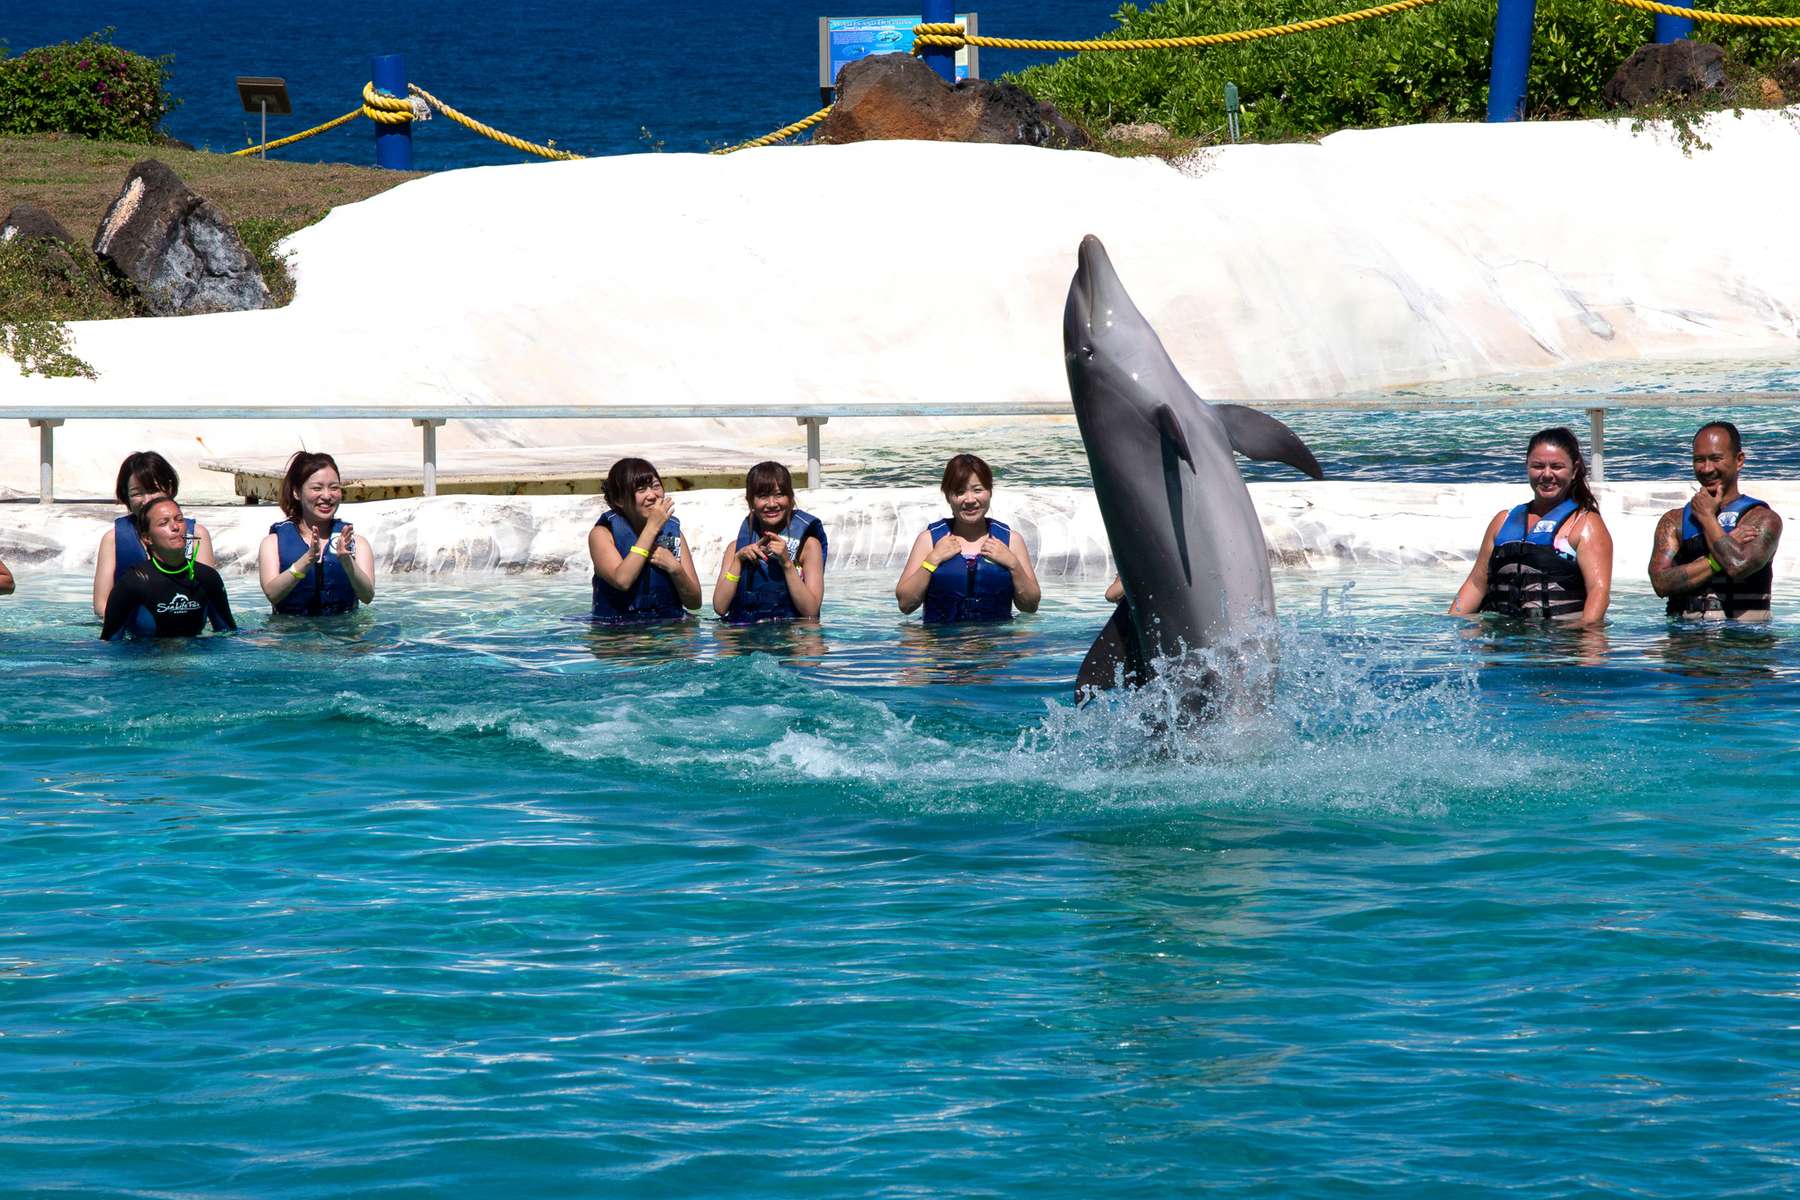 Patrons watch dolphins perform at Sea Life Park in Waimanalo, HI. Just beyond their tanks is Waimanale Bay and the Pacific Ocean. (photo © Karen Ducey)